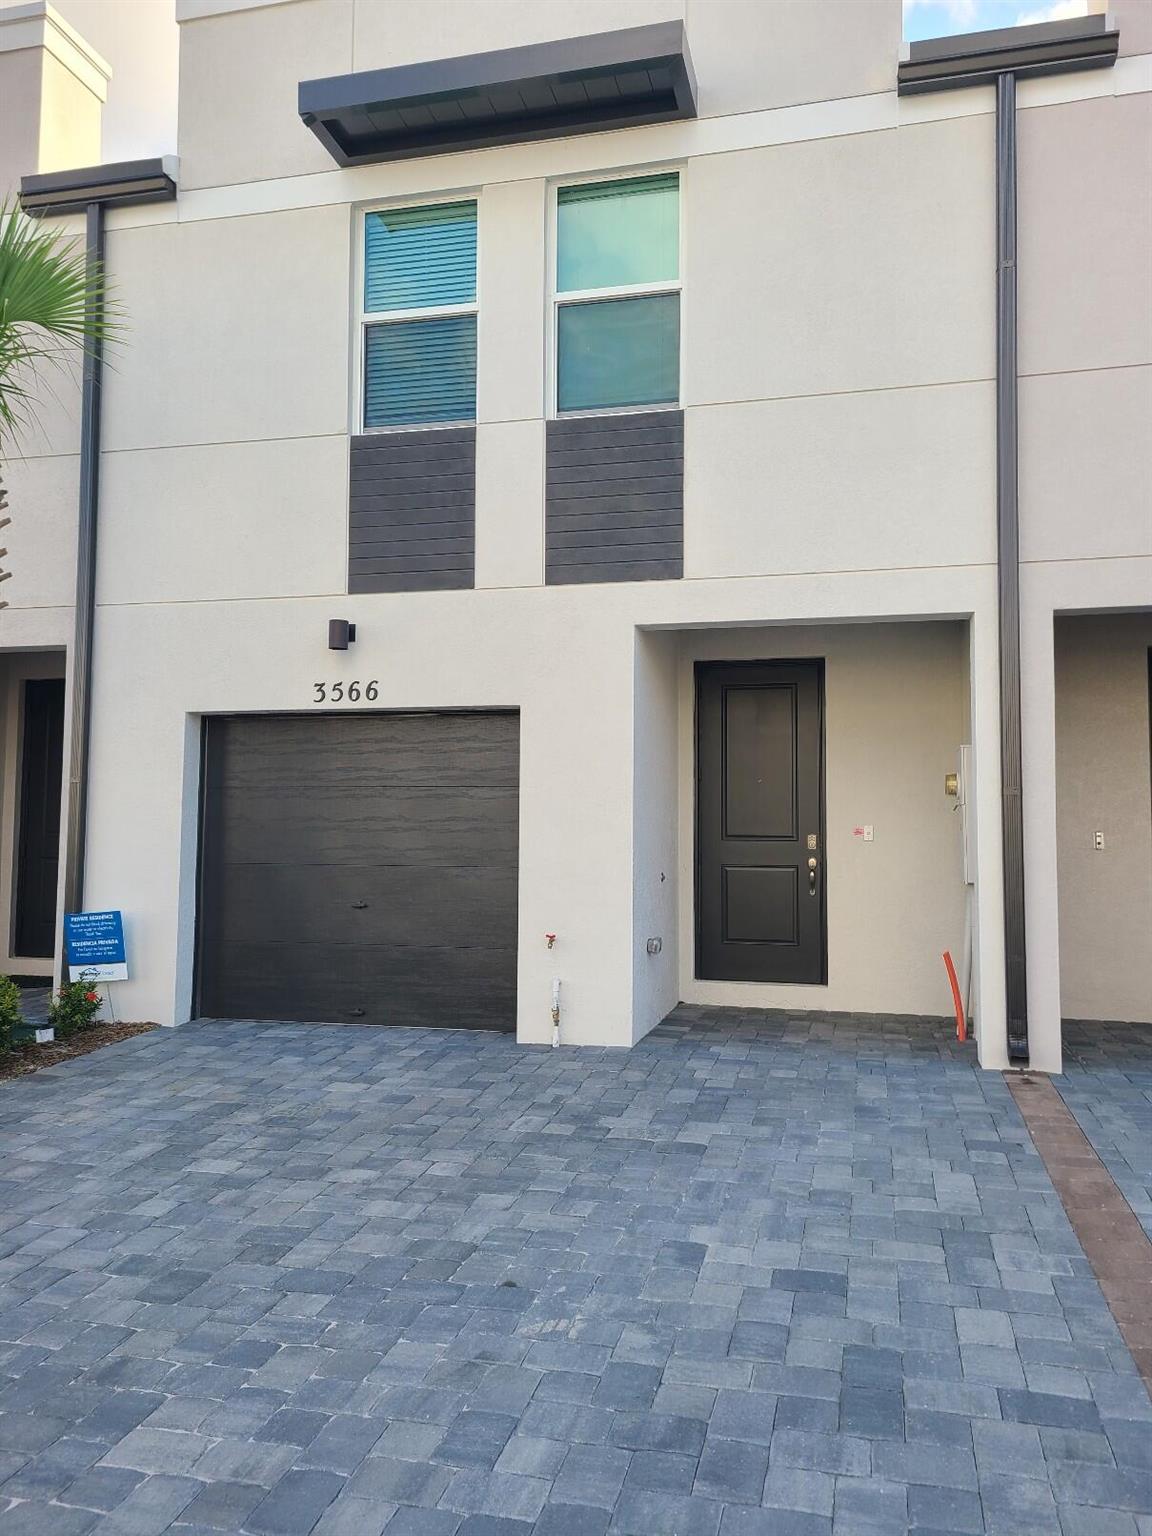 View Palm Springs, FL 33461 townhome